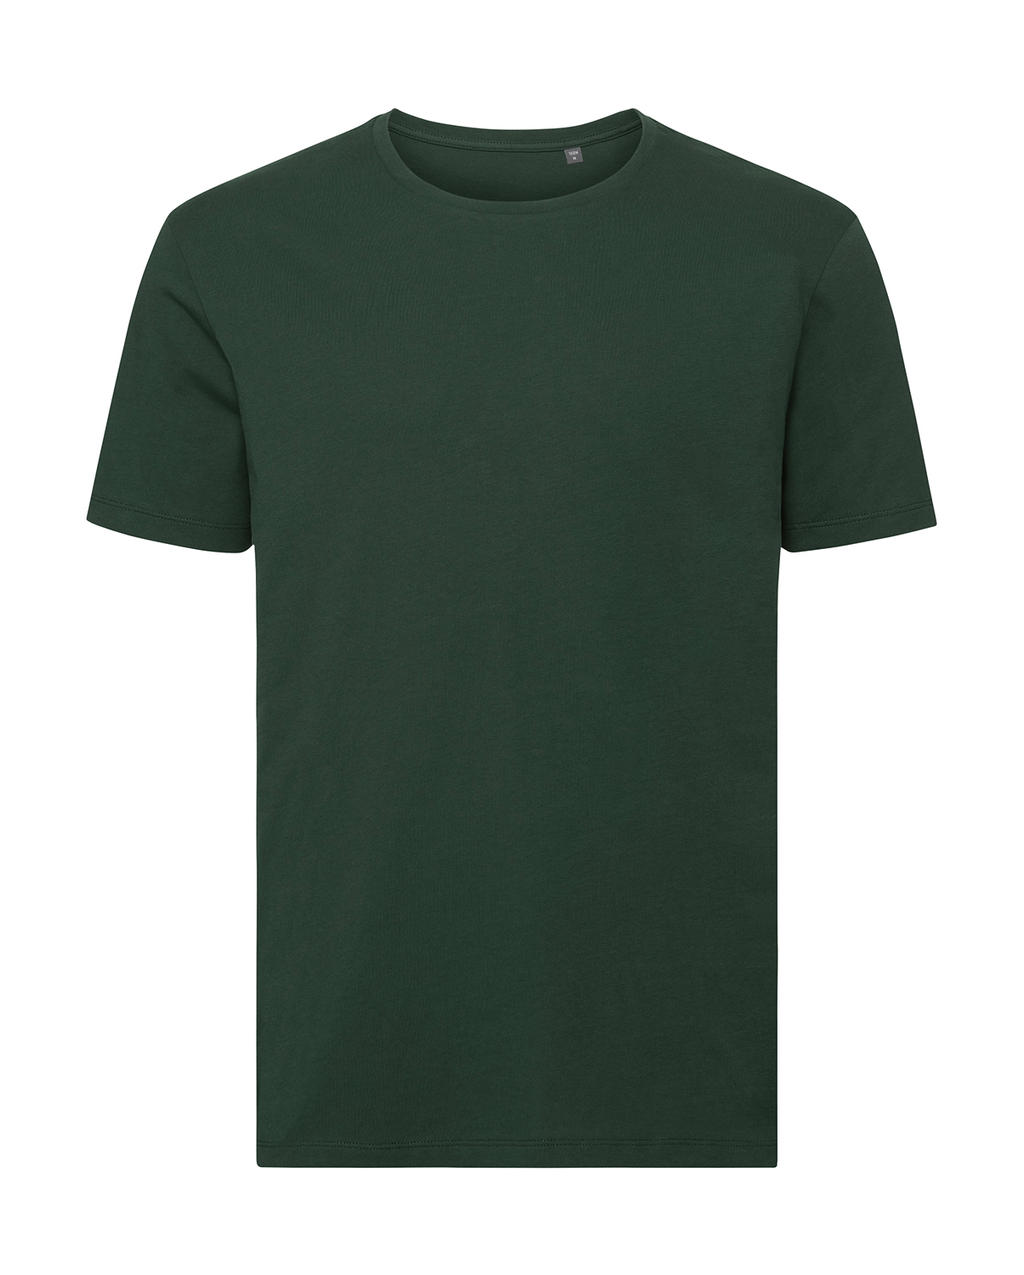  Mens Pure Organic Tee  in Farbe Bottle Green